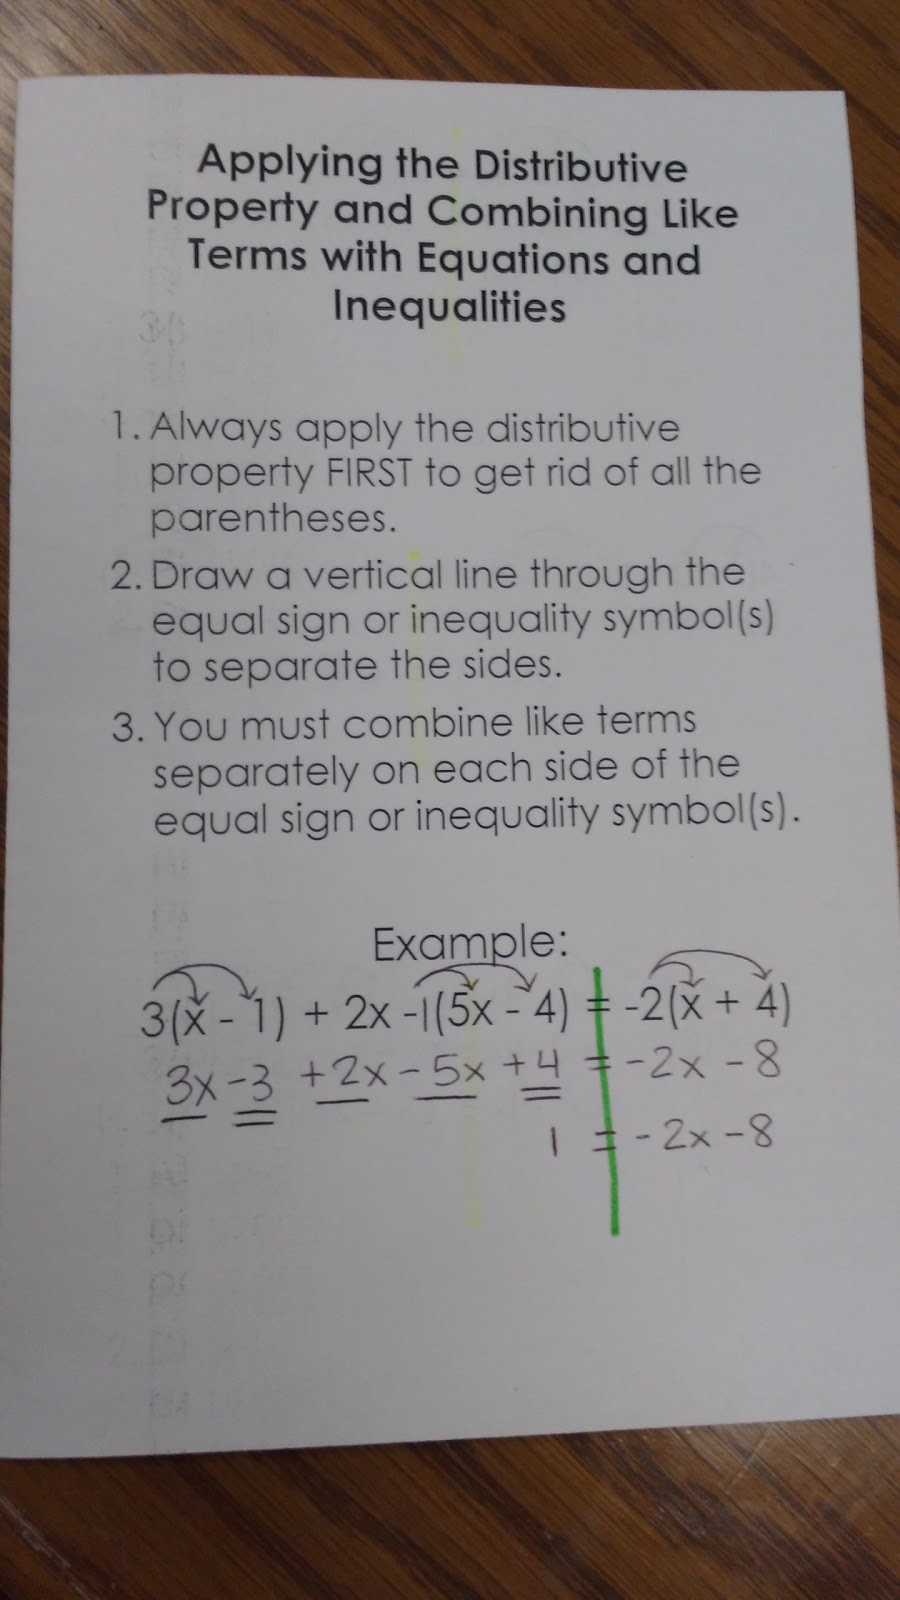 Distributive Property Foldable with Example of Line Drawn Through Equal Sign